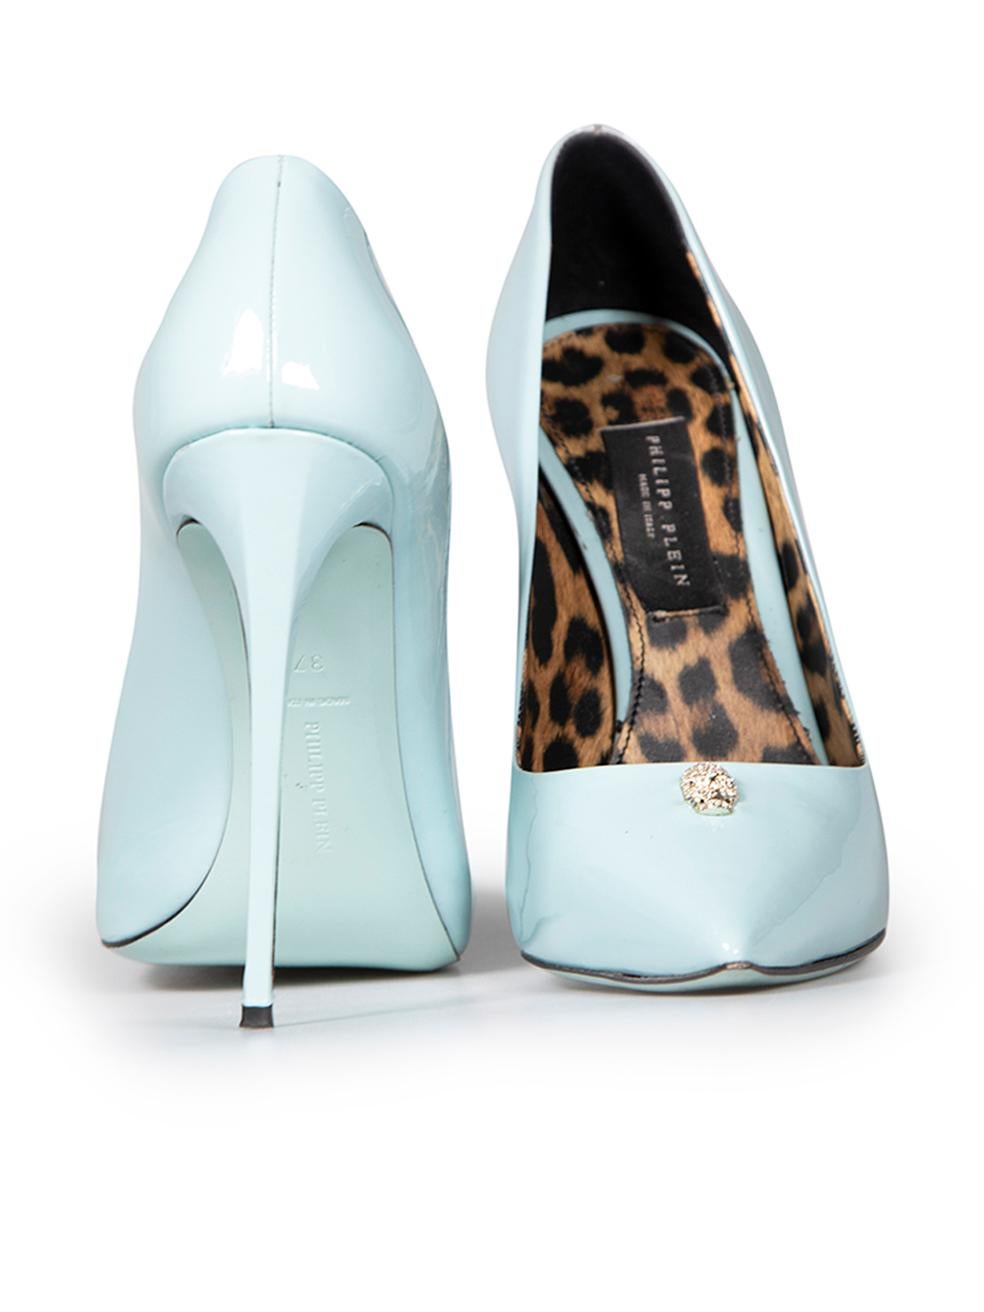 Philipp Plein Pale Blue Patent Leather High Pumps Size IT 37 In Good Condition For Sale In London, GB